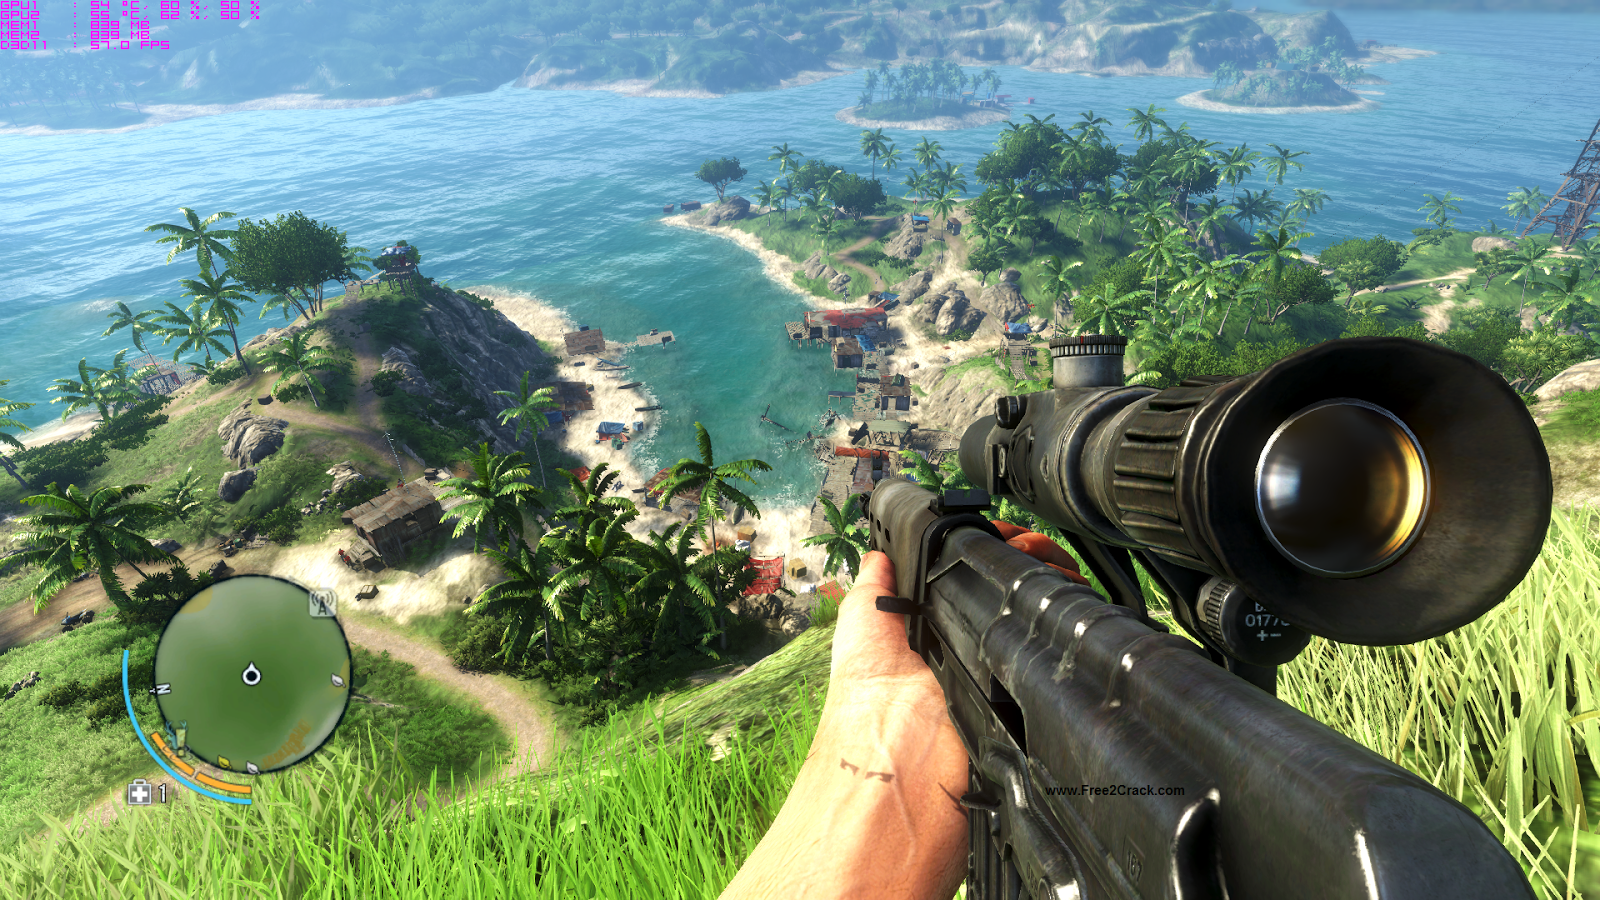 download far cry 3 full game for android